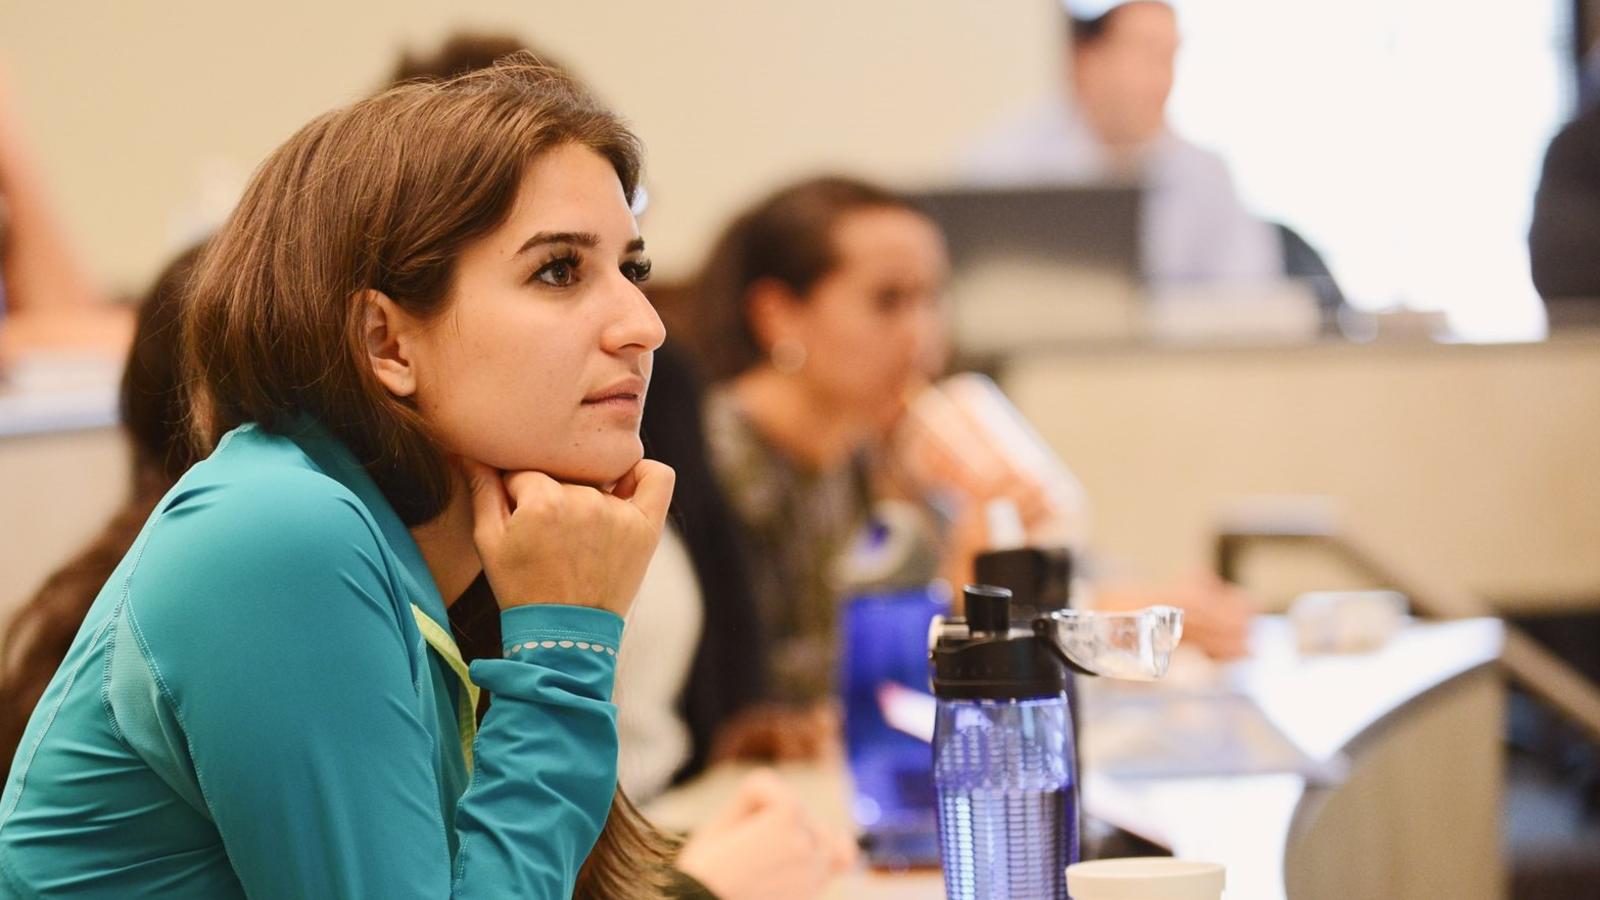 Female student in blue shirt engaging in class